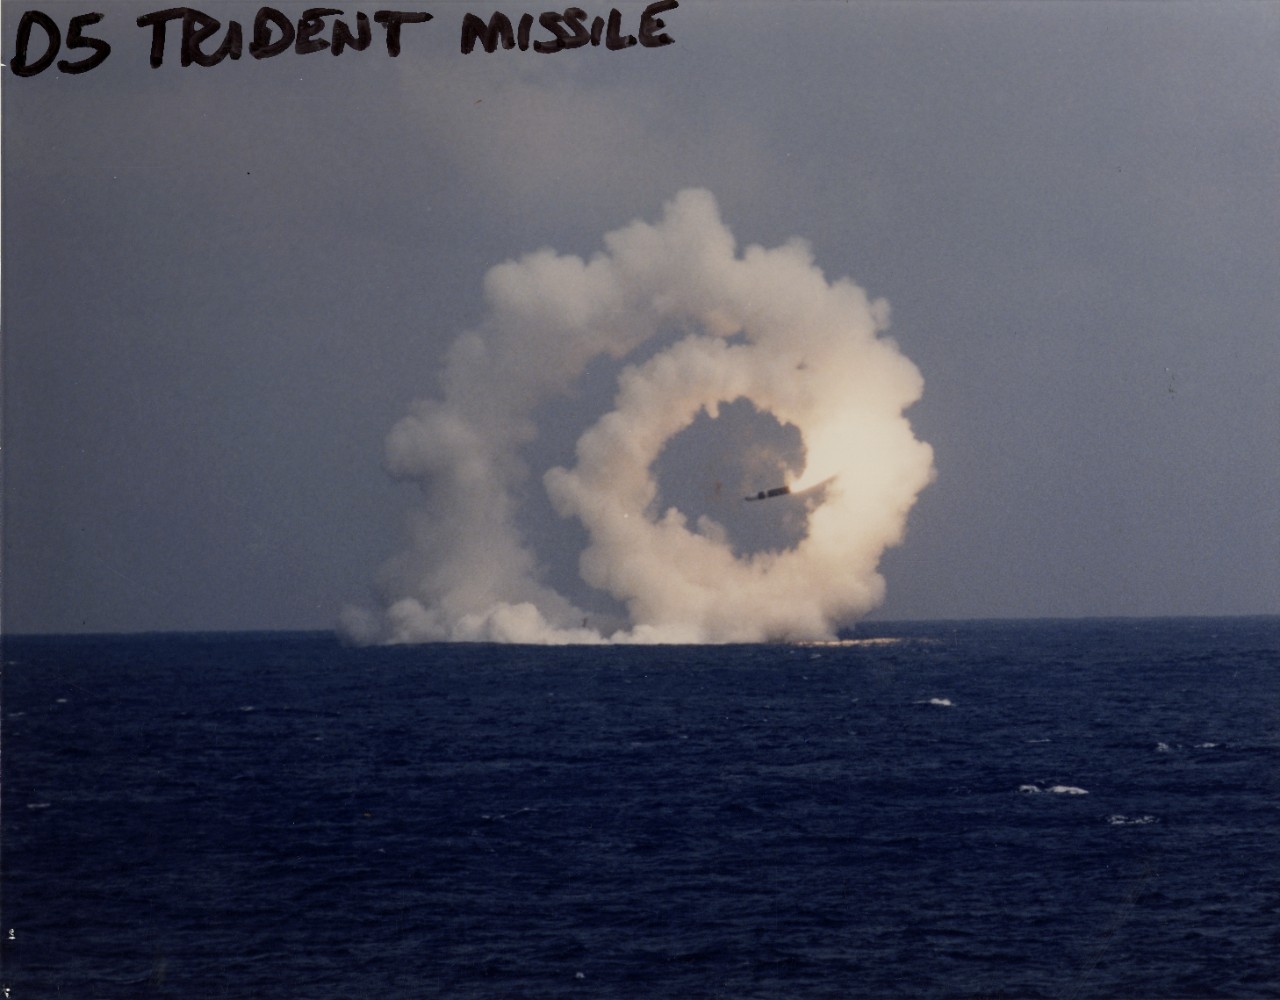 <p>L55-15.04.02 Trident Missile Malfunction</p>
